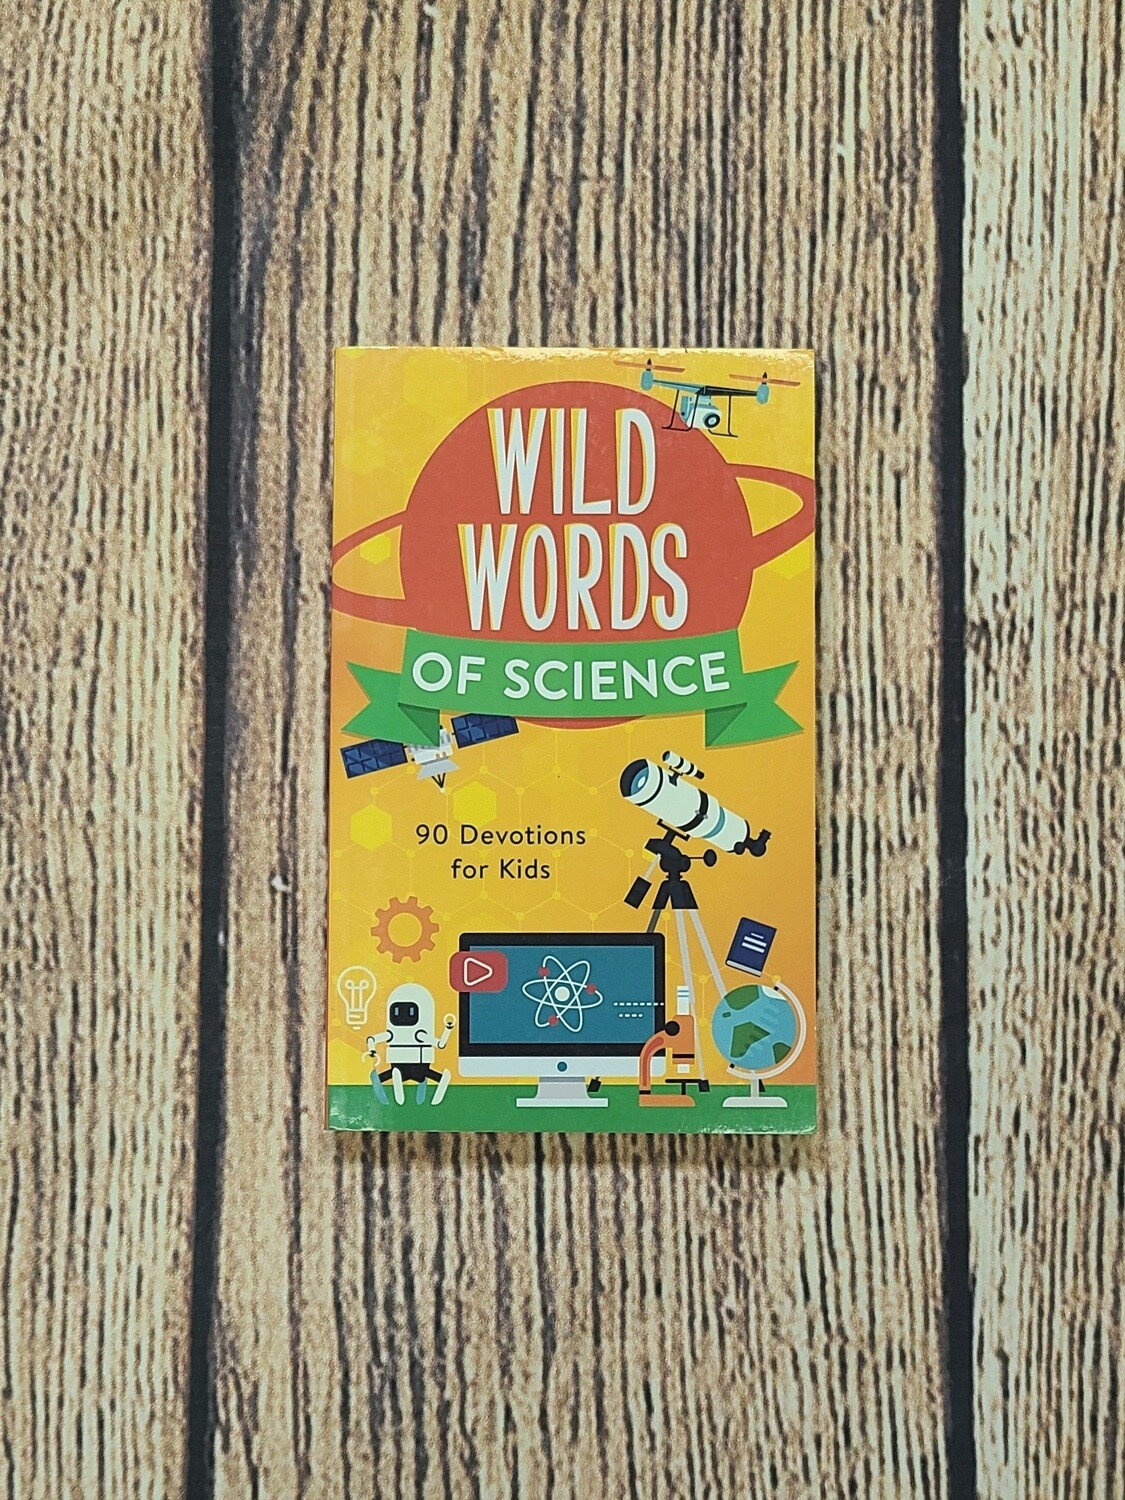 Wild Words of Science: 90 Devotions for Kids by Tracy M. Sumner